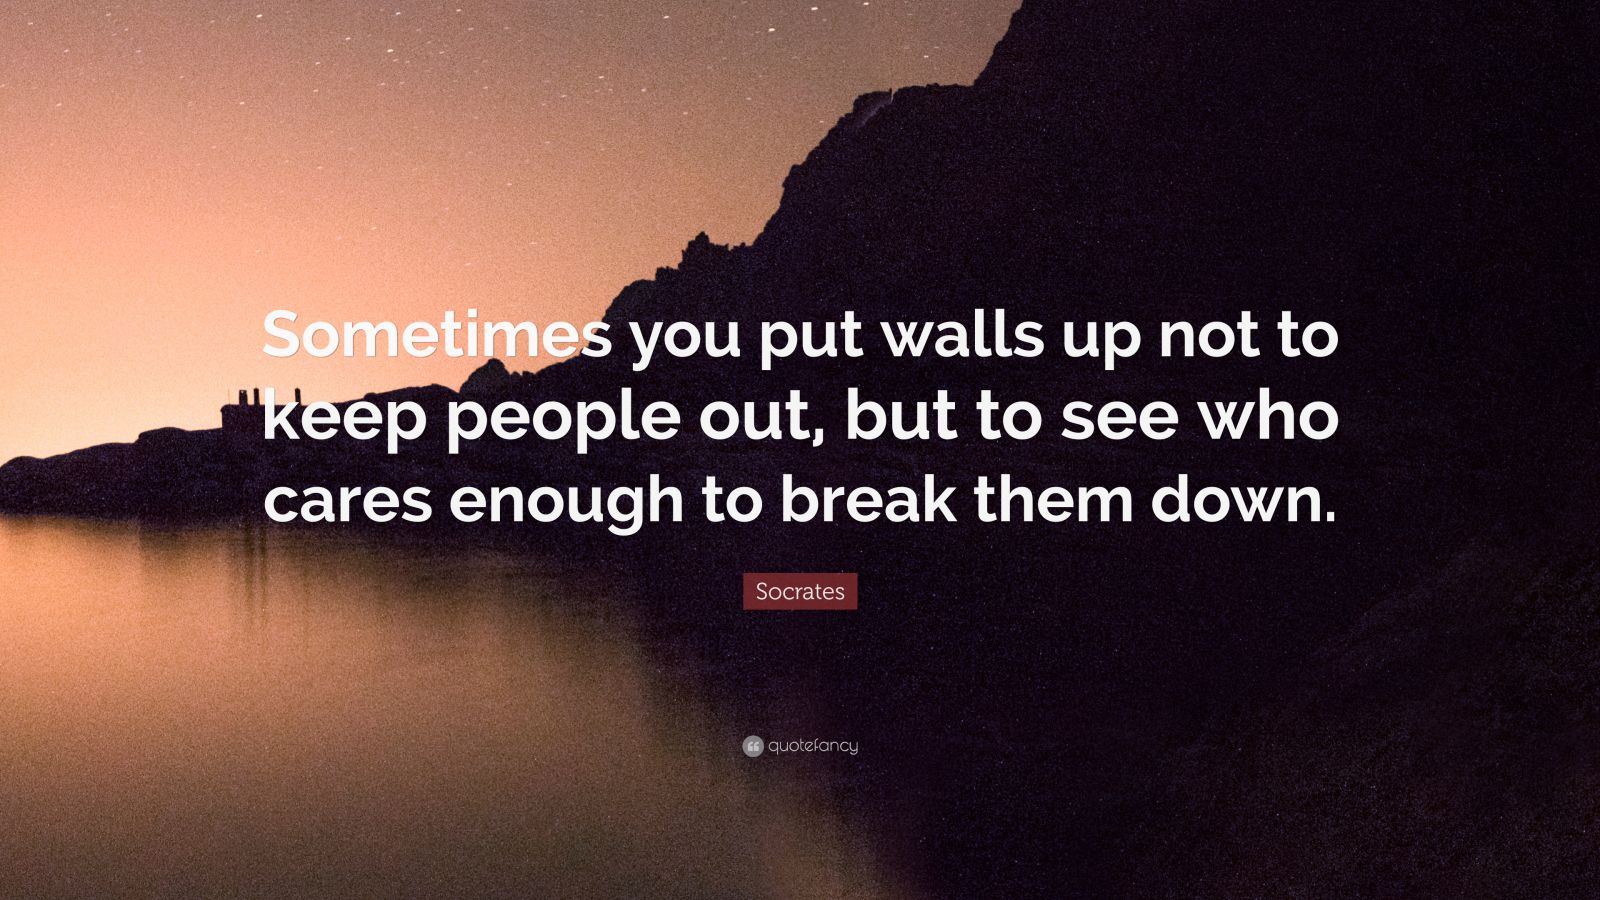 Socrates Quote: “Sometimes you put walls up not to keep people out, but